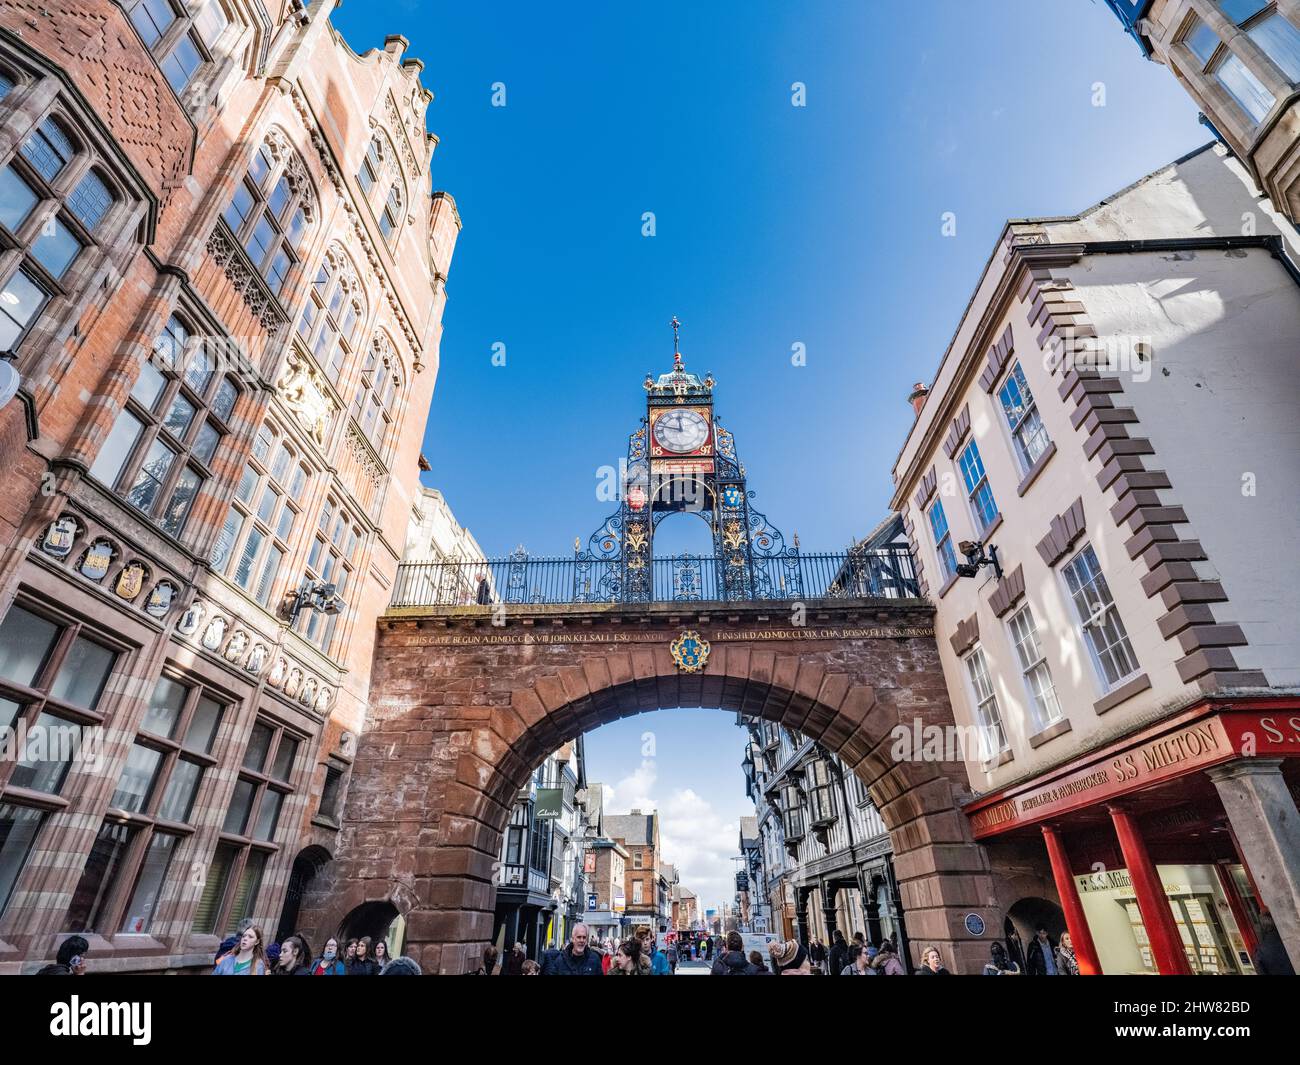 Eastgate Clock, Chester Stock Photo